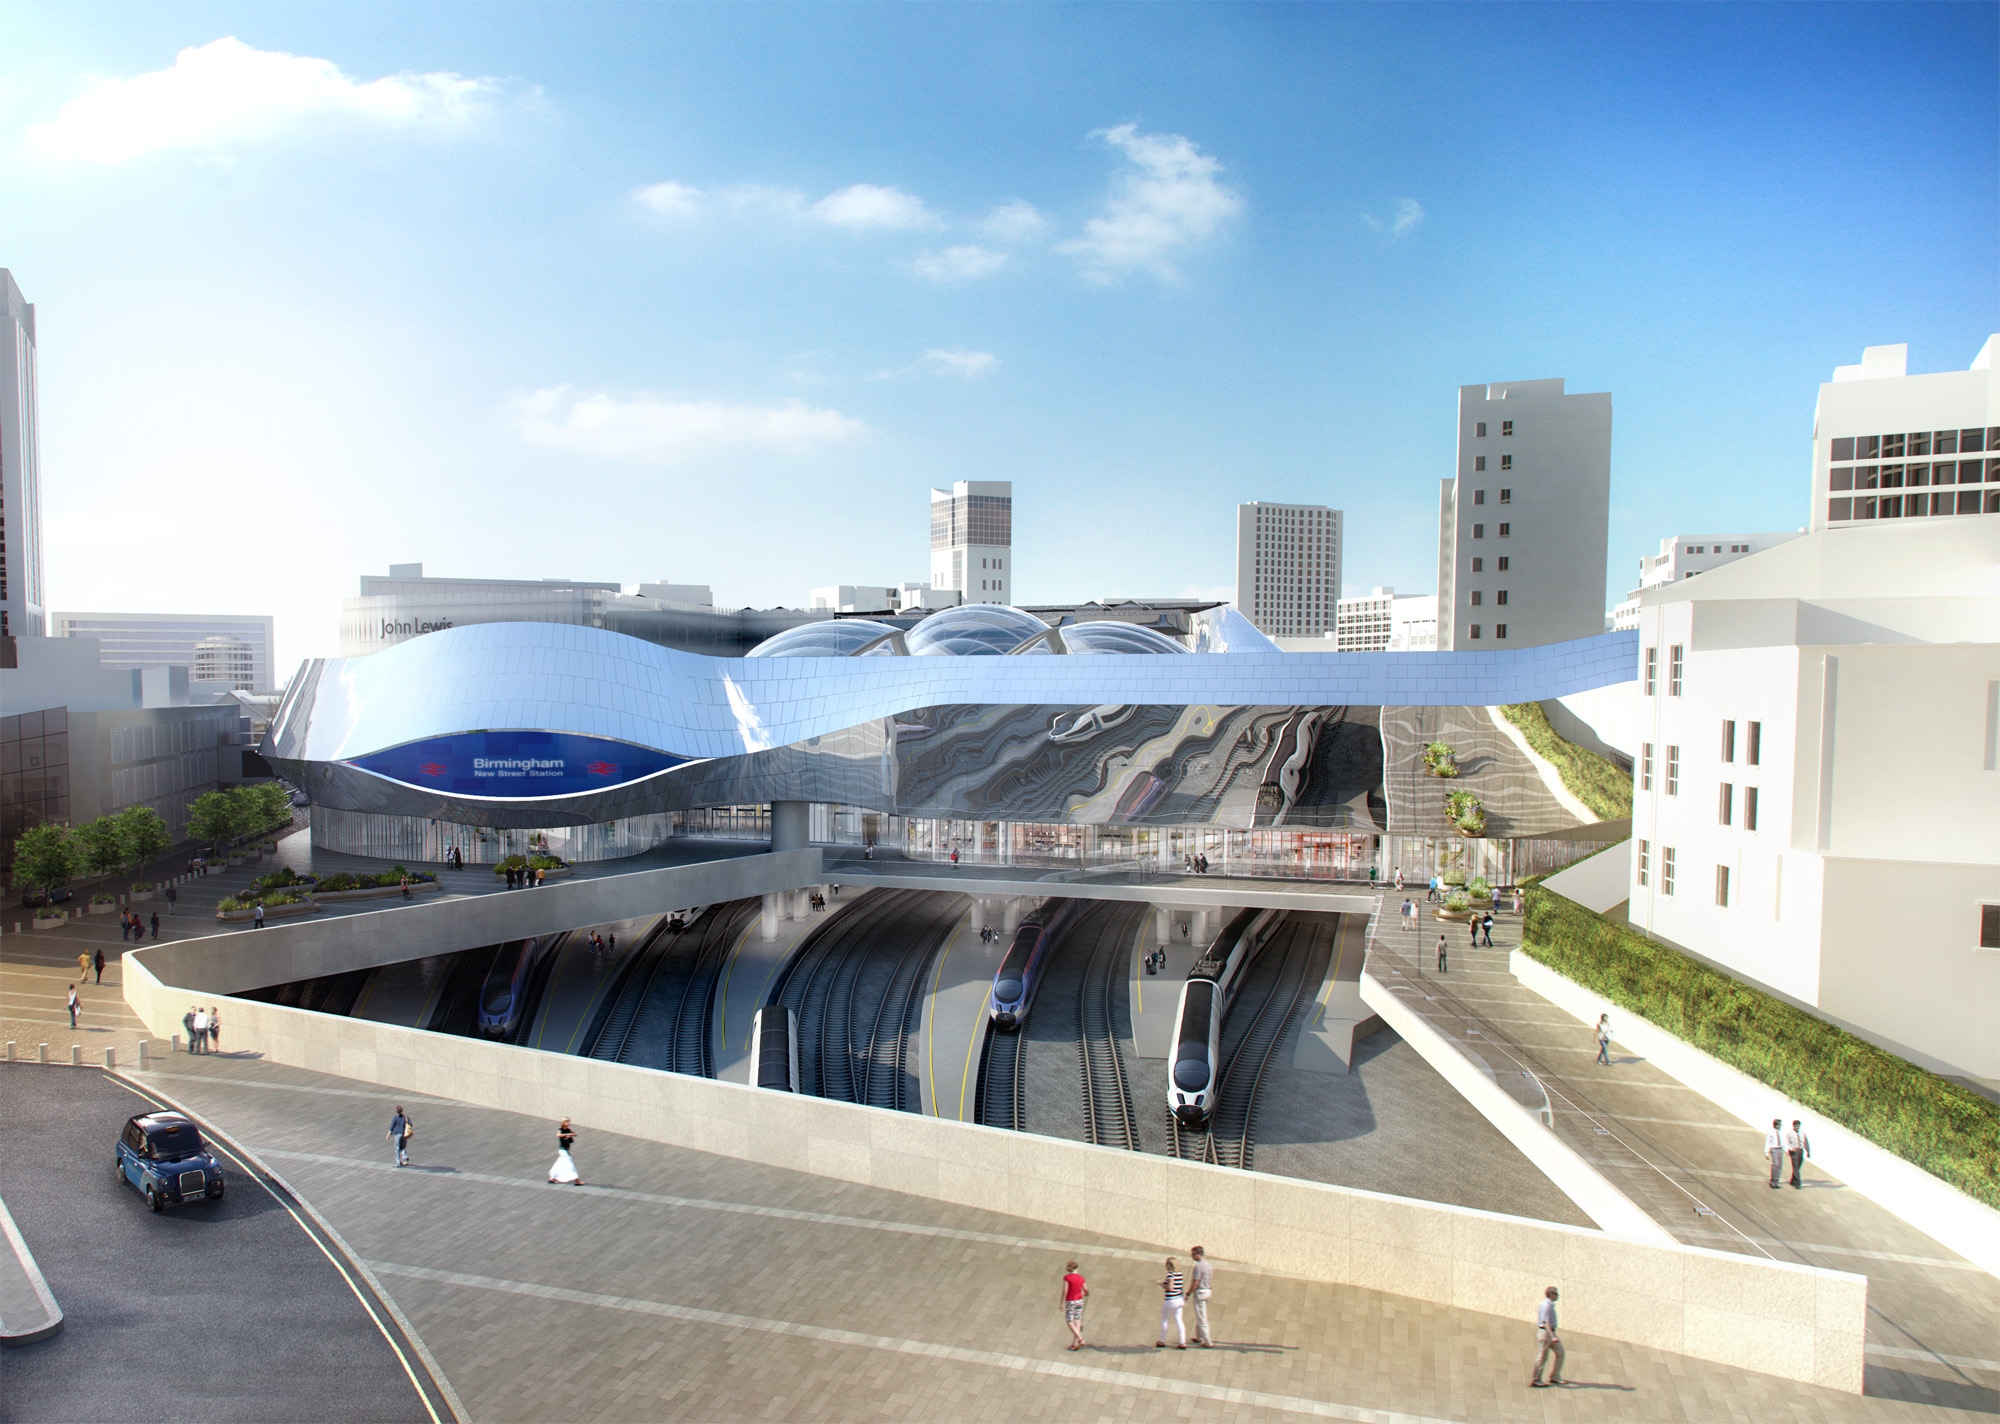 Birmingham New Street doubles retail space as completion nears